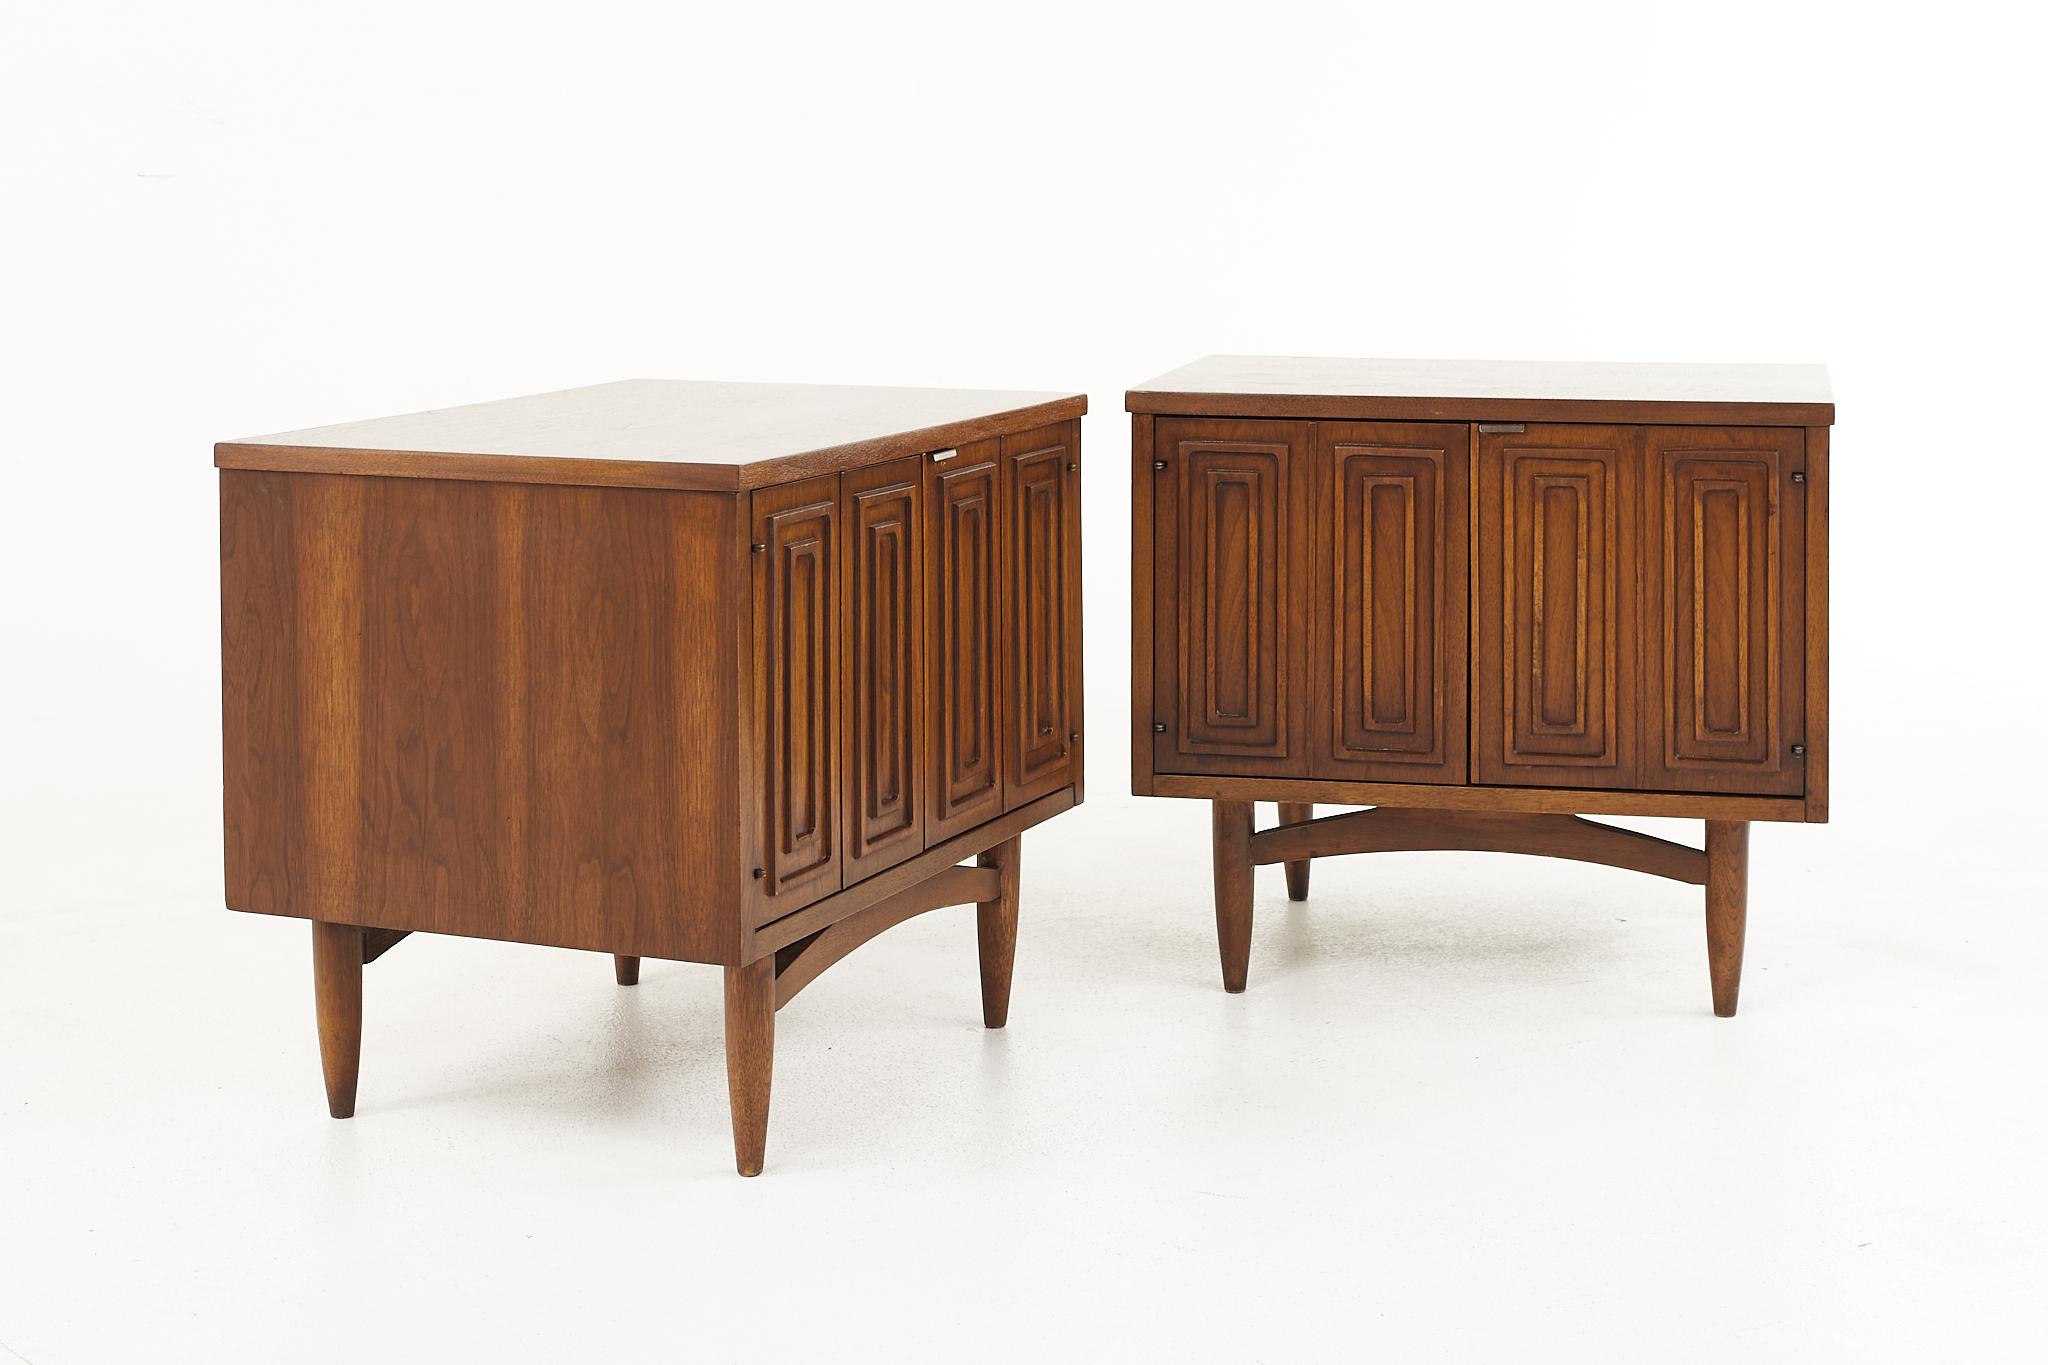 Broyhill sculptra Brutalist mid century walnut commode nightstands - a pair.

Each nightstand measures: 24 wide x 18 deep x 21.5 inches high

All pieces of furniture can be had in what we call restored vintage condition. That means the piece is